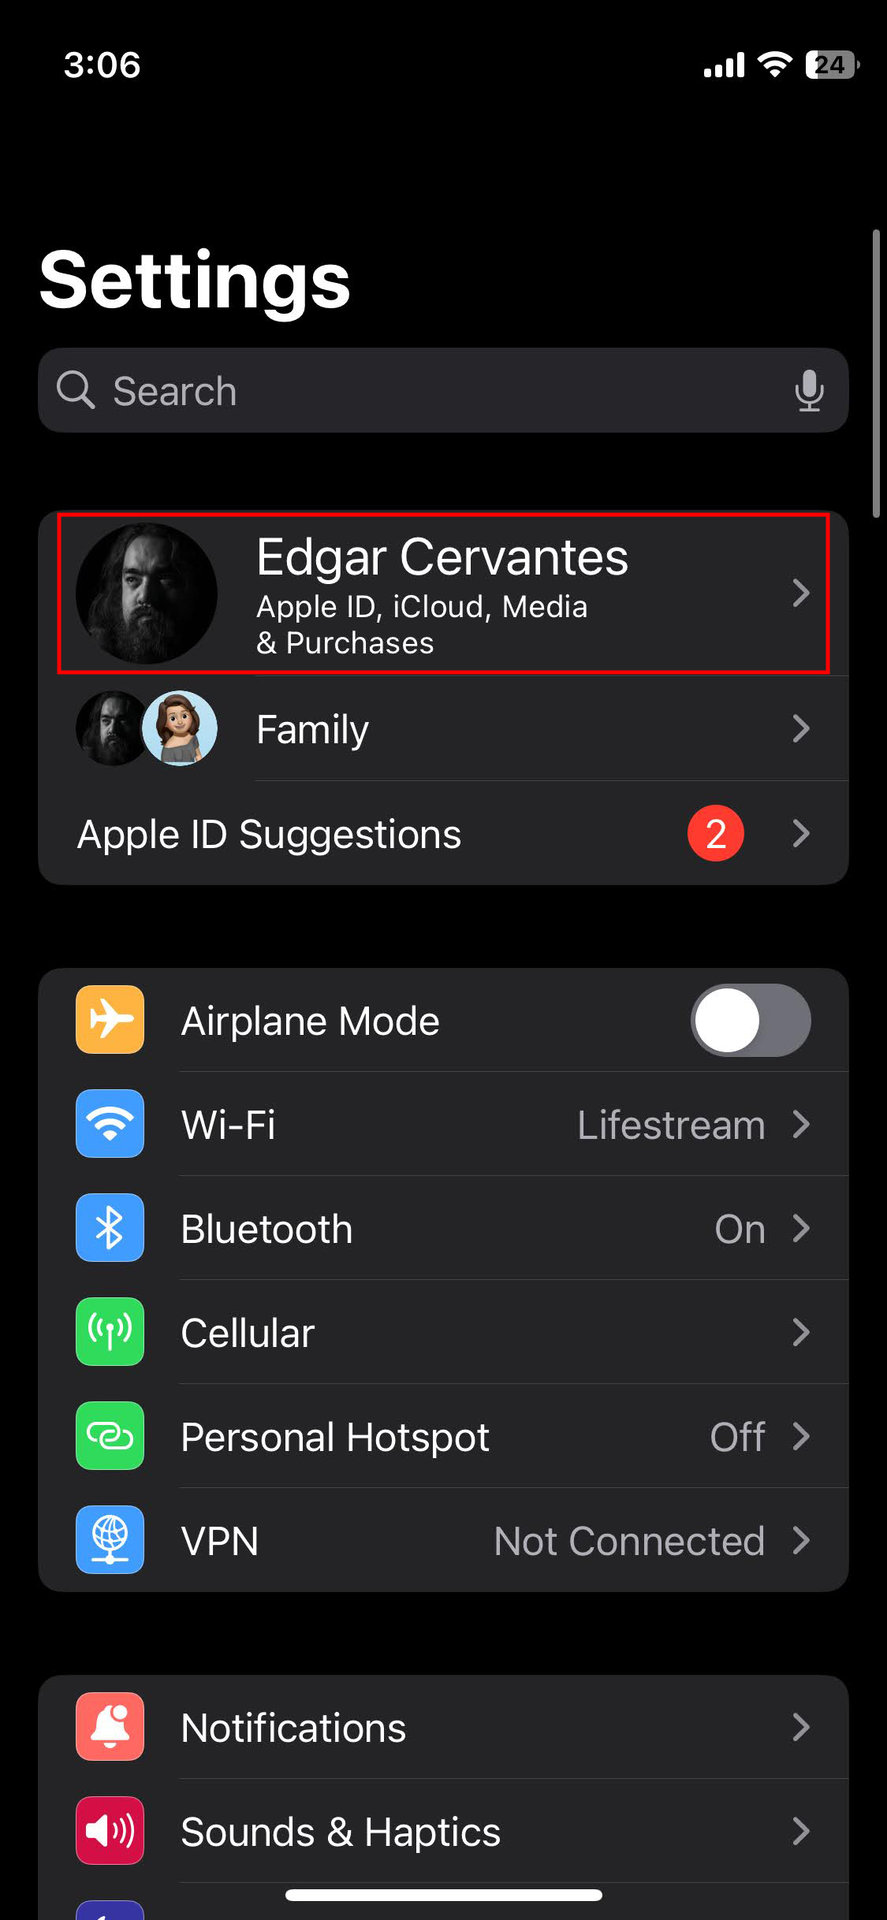 How to sign devices out of Apple ID using an iPhone (1)